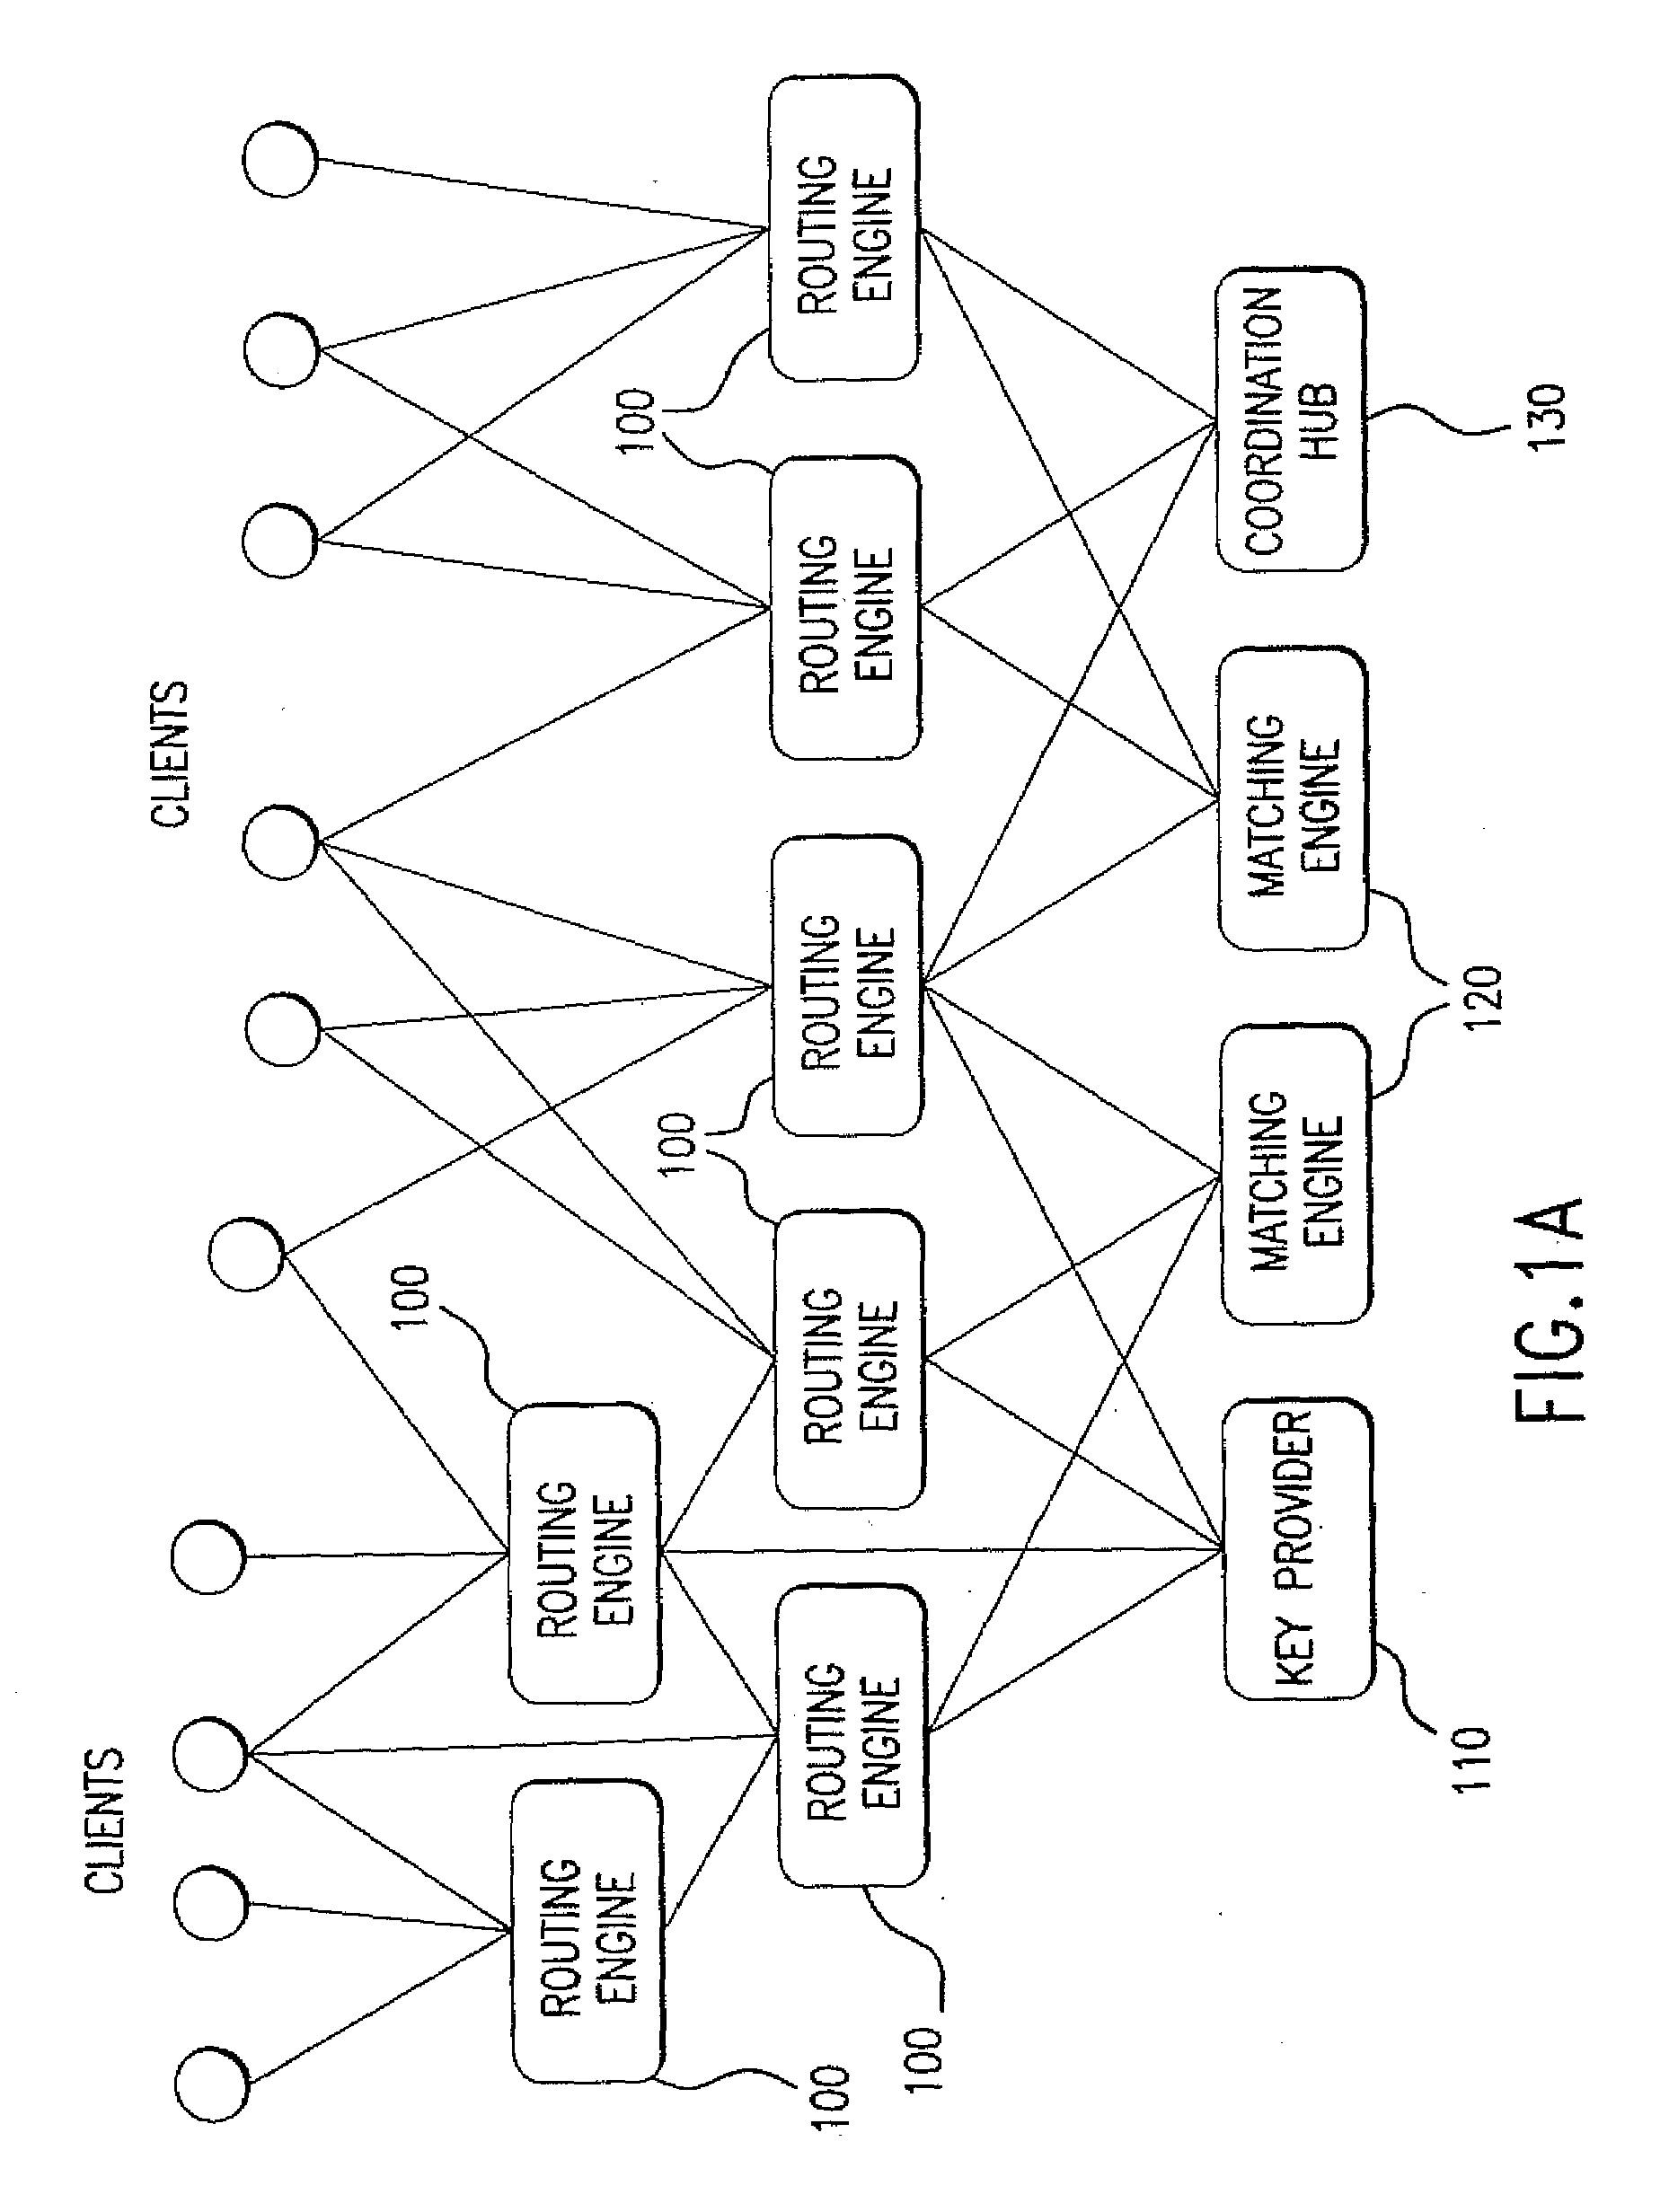 Method for managing distributed trading data